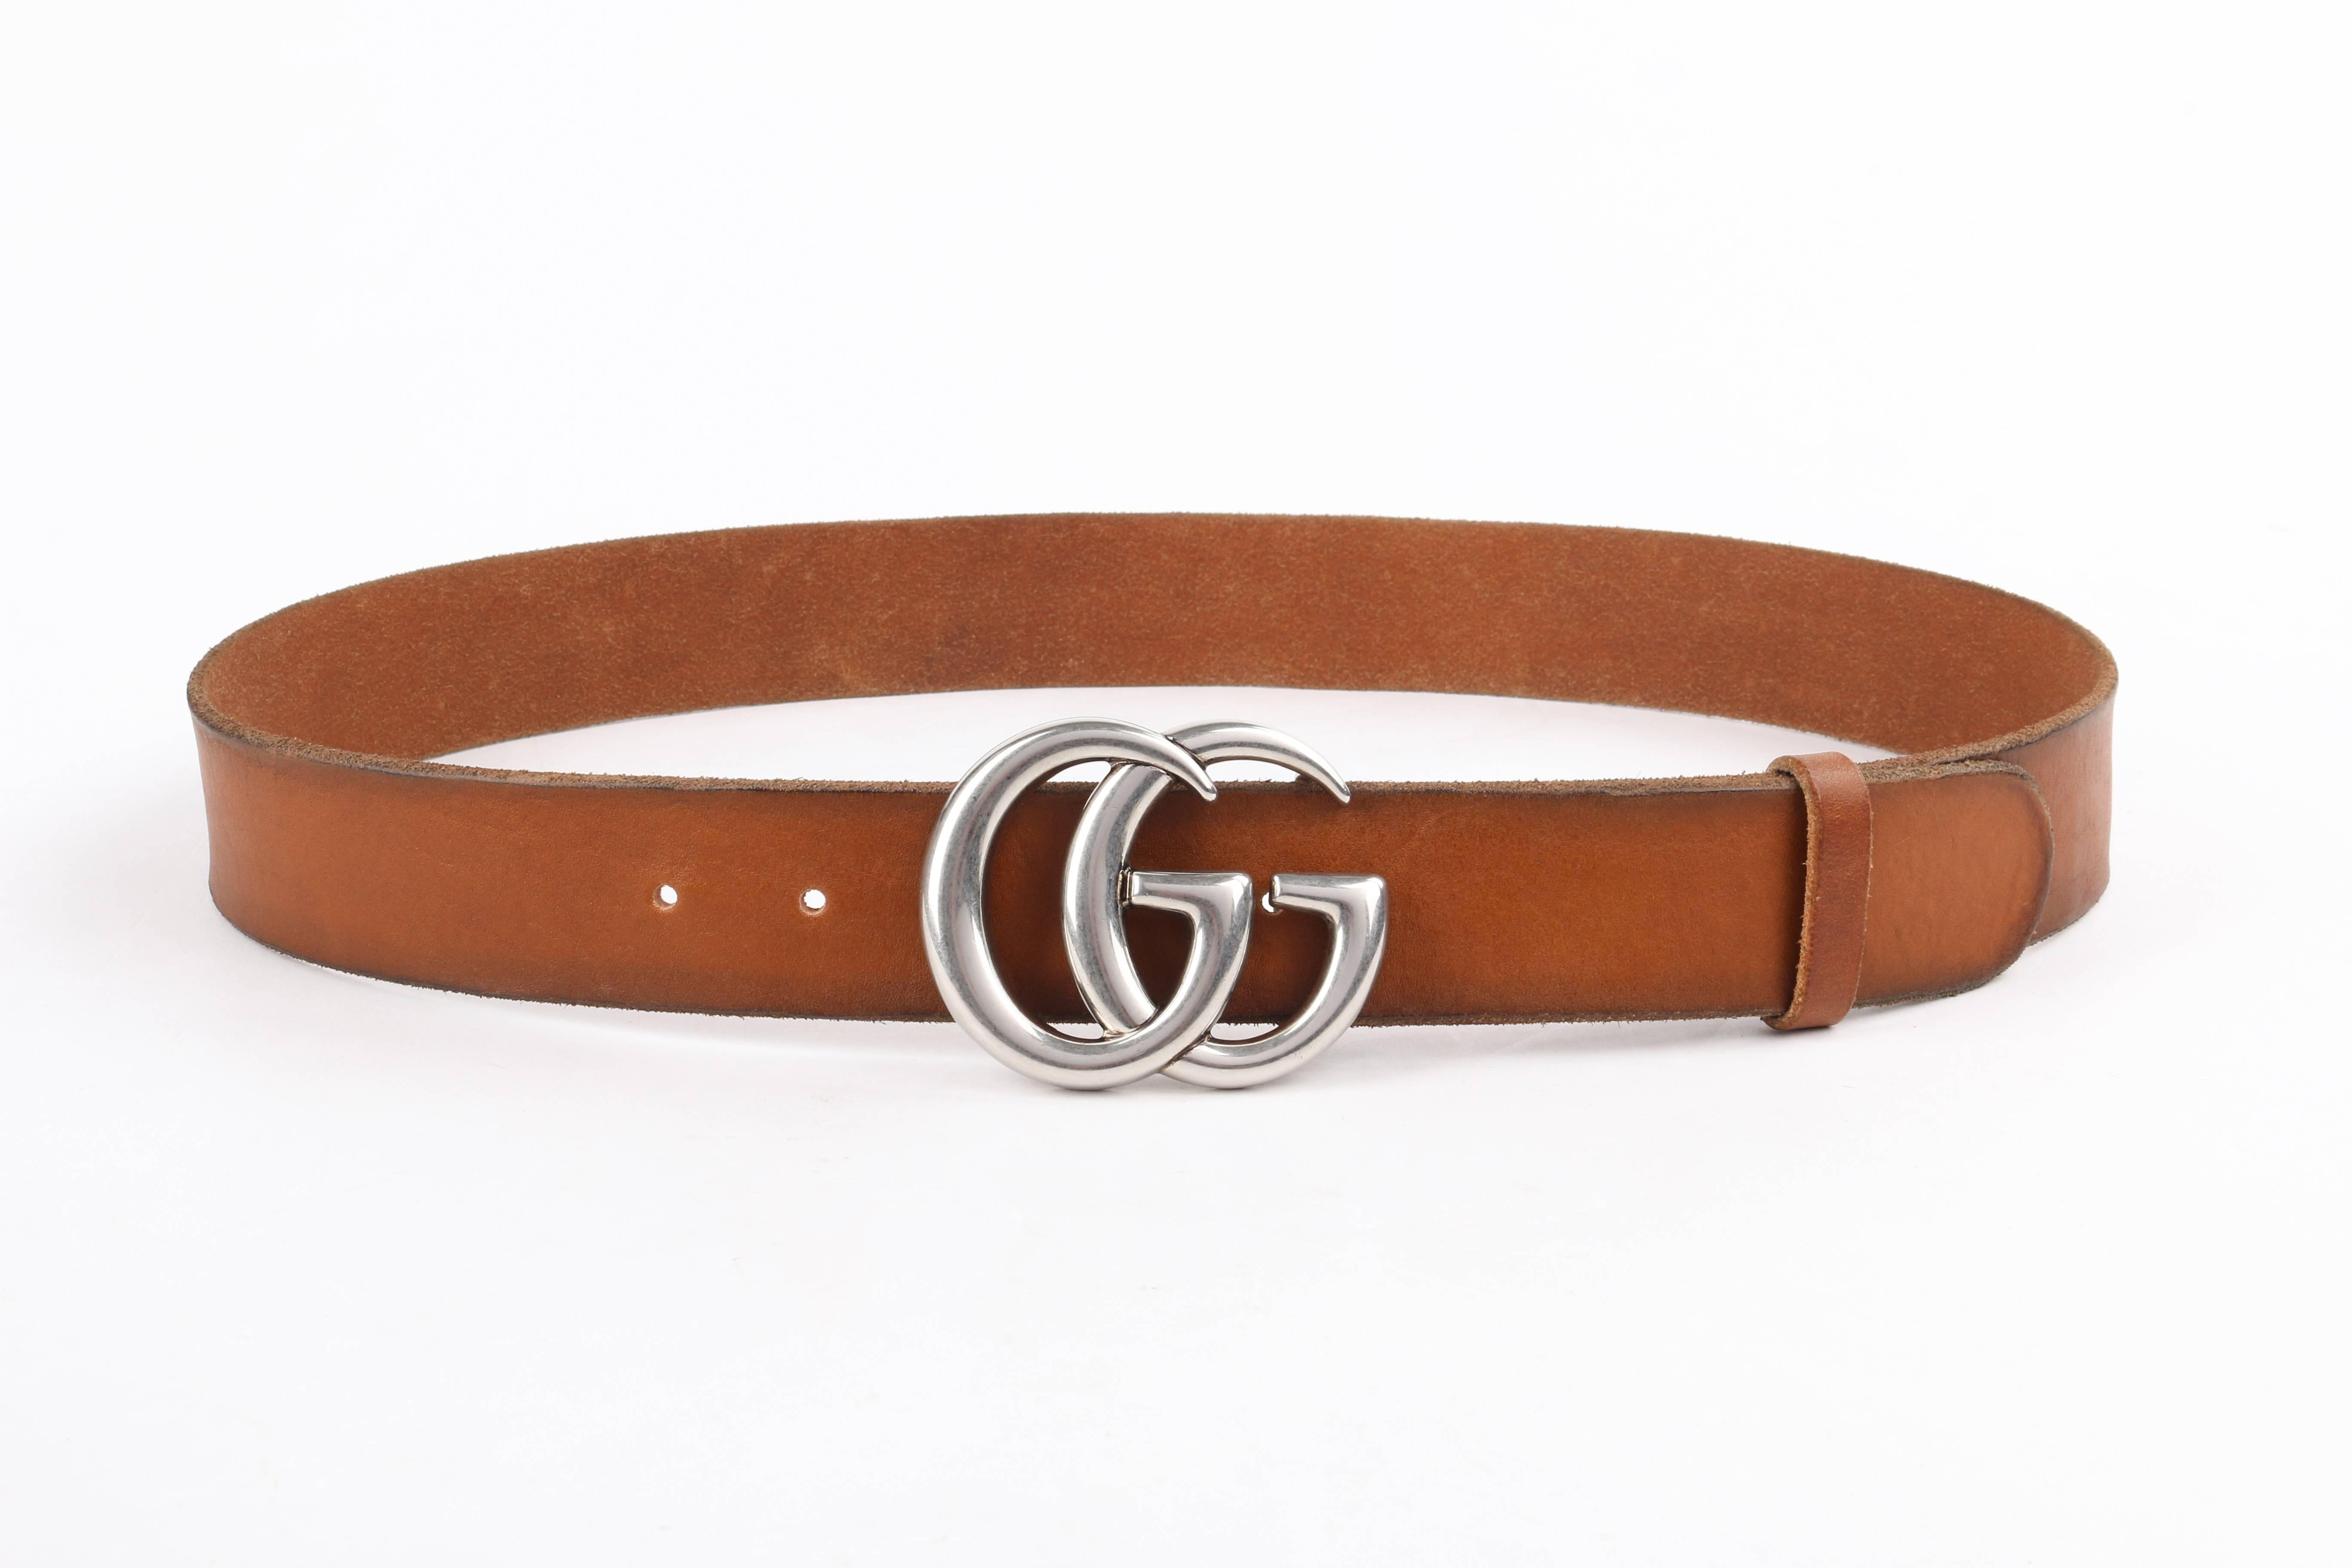 Gucci classic brown leather double G buckle belt. Brown faded distressed leather body with rounded end. Palladium-toned double interlocking G buckle. Marked: "Gucci Made In Italy"; Model: "409416 CVEOT". Marked Size: "95 /